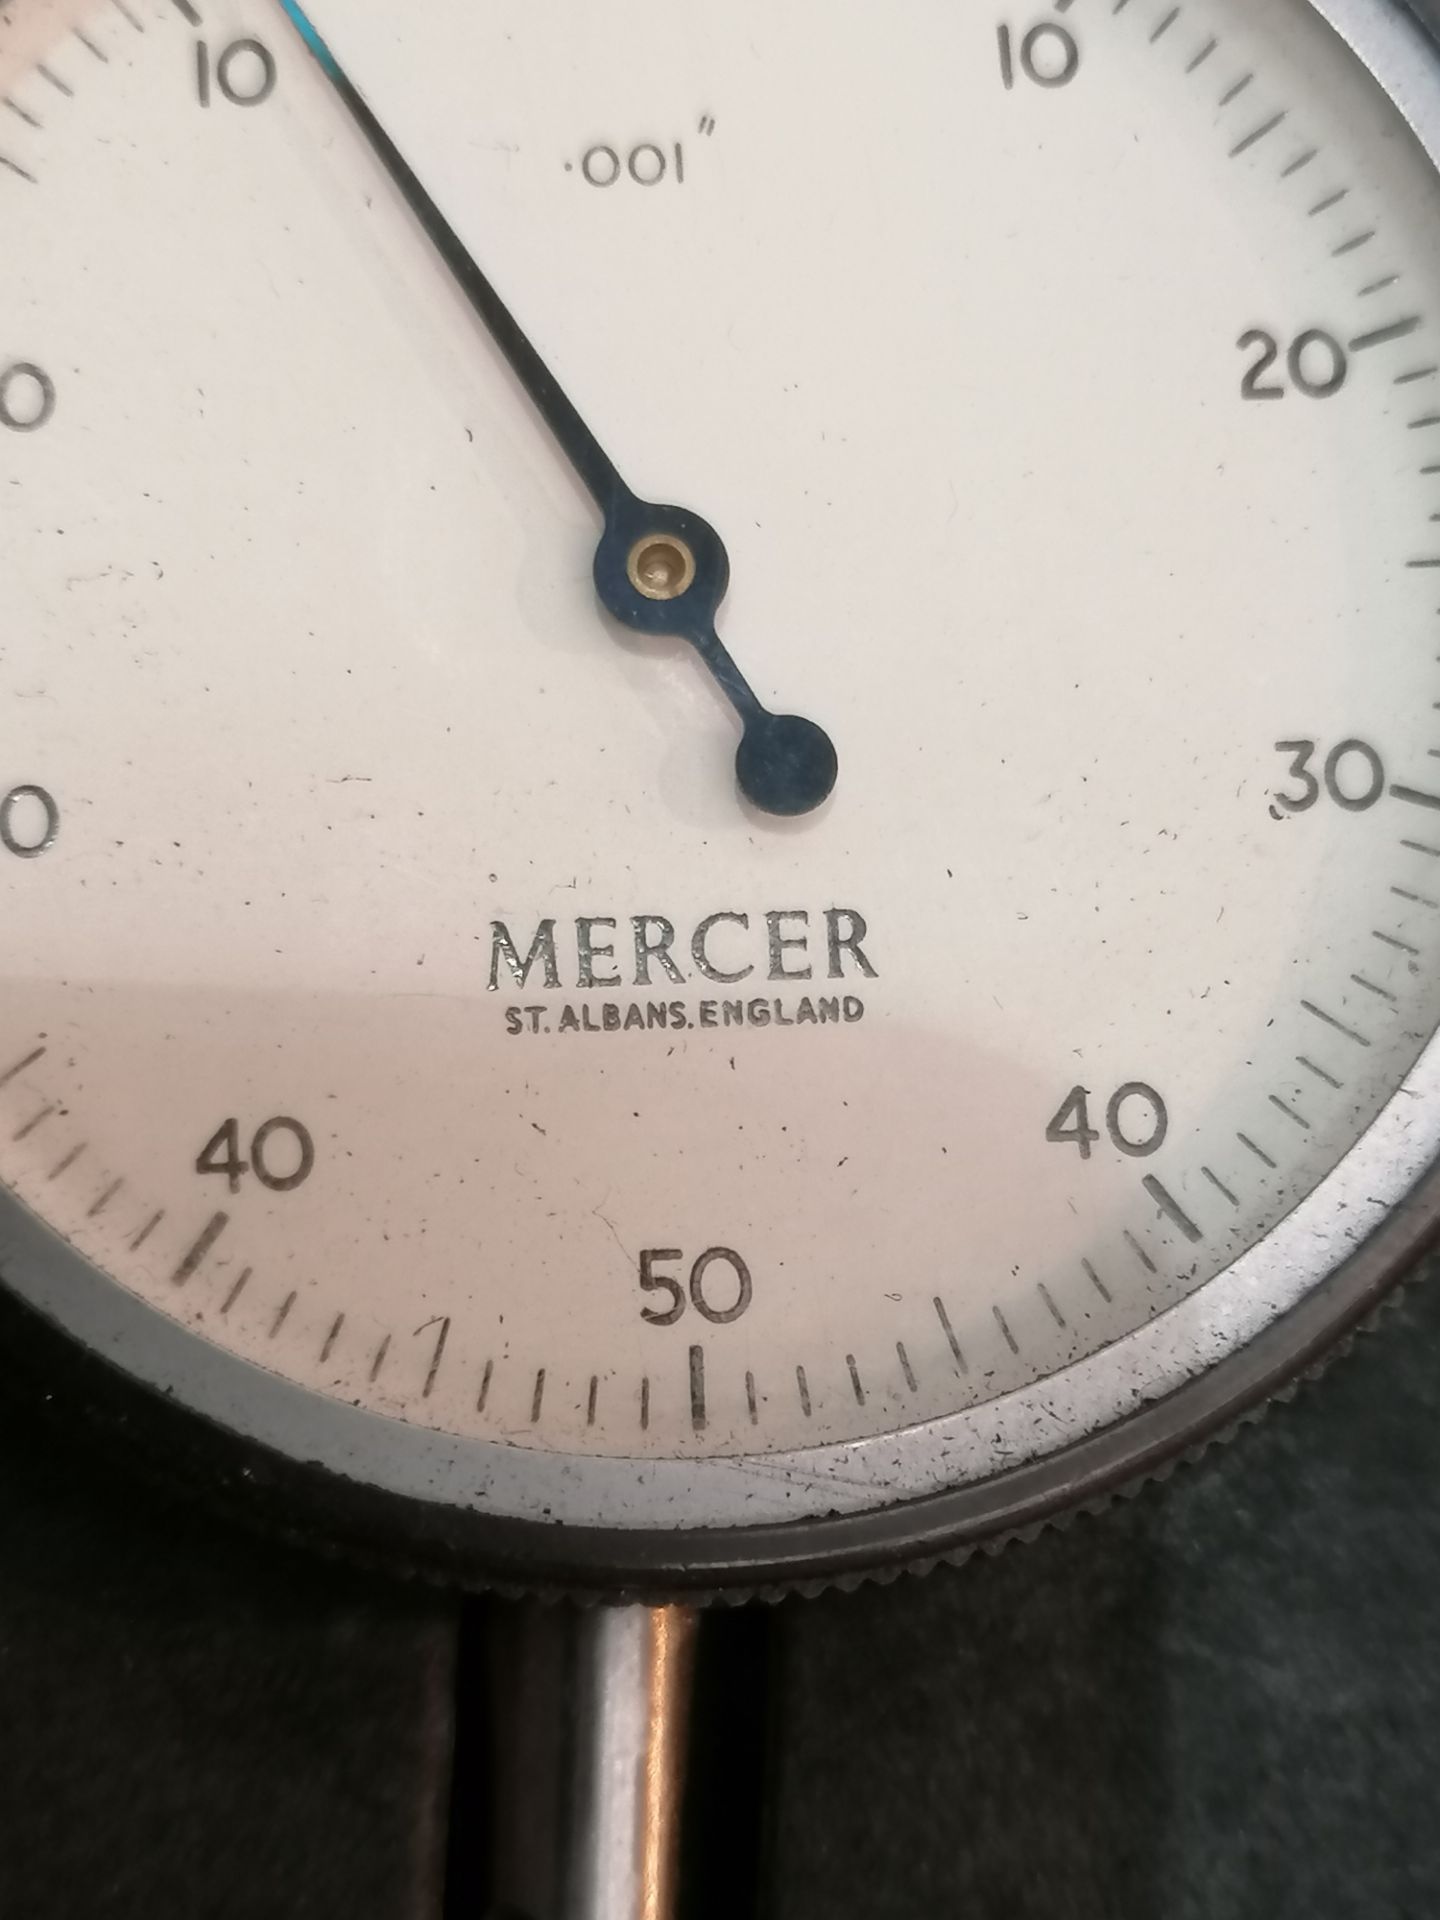 Mercer dial gauge with draper magnetic stand - Image 4 of 4